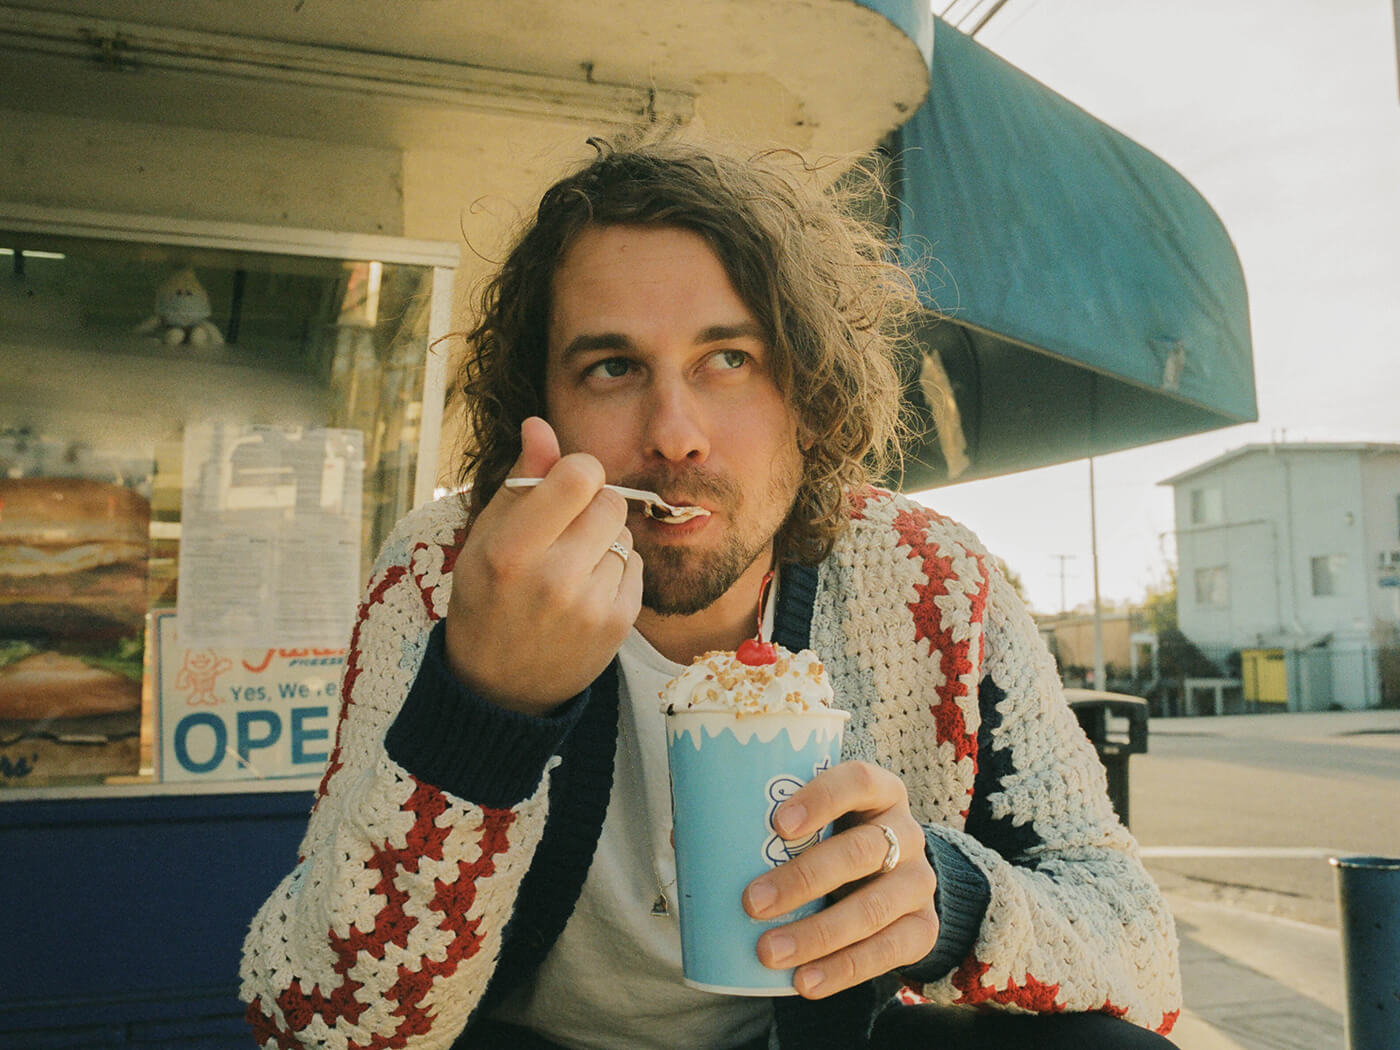 Kevin Morby – This Is A Photograph